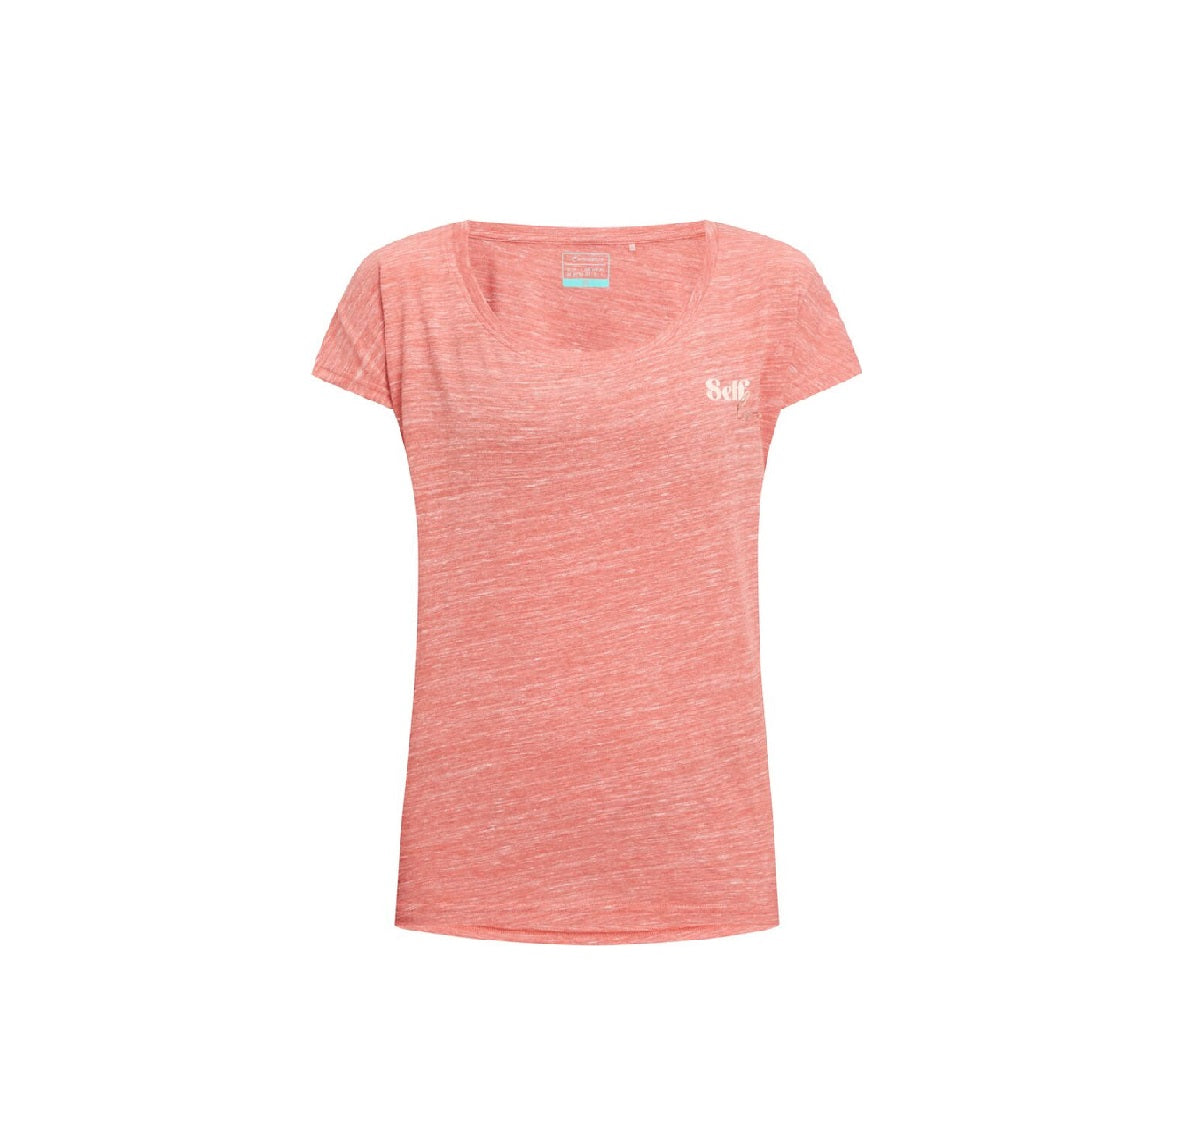 Energetics Cully Lifestyle T-Shirt For Women, Red